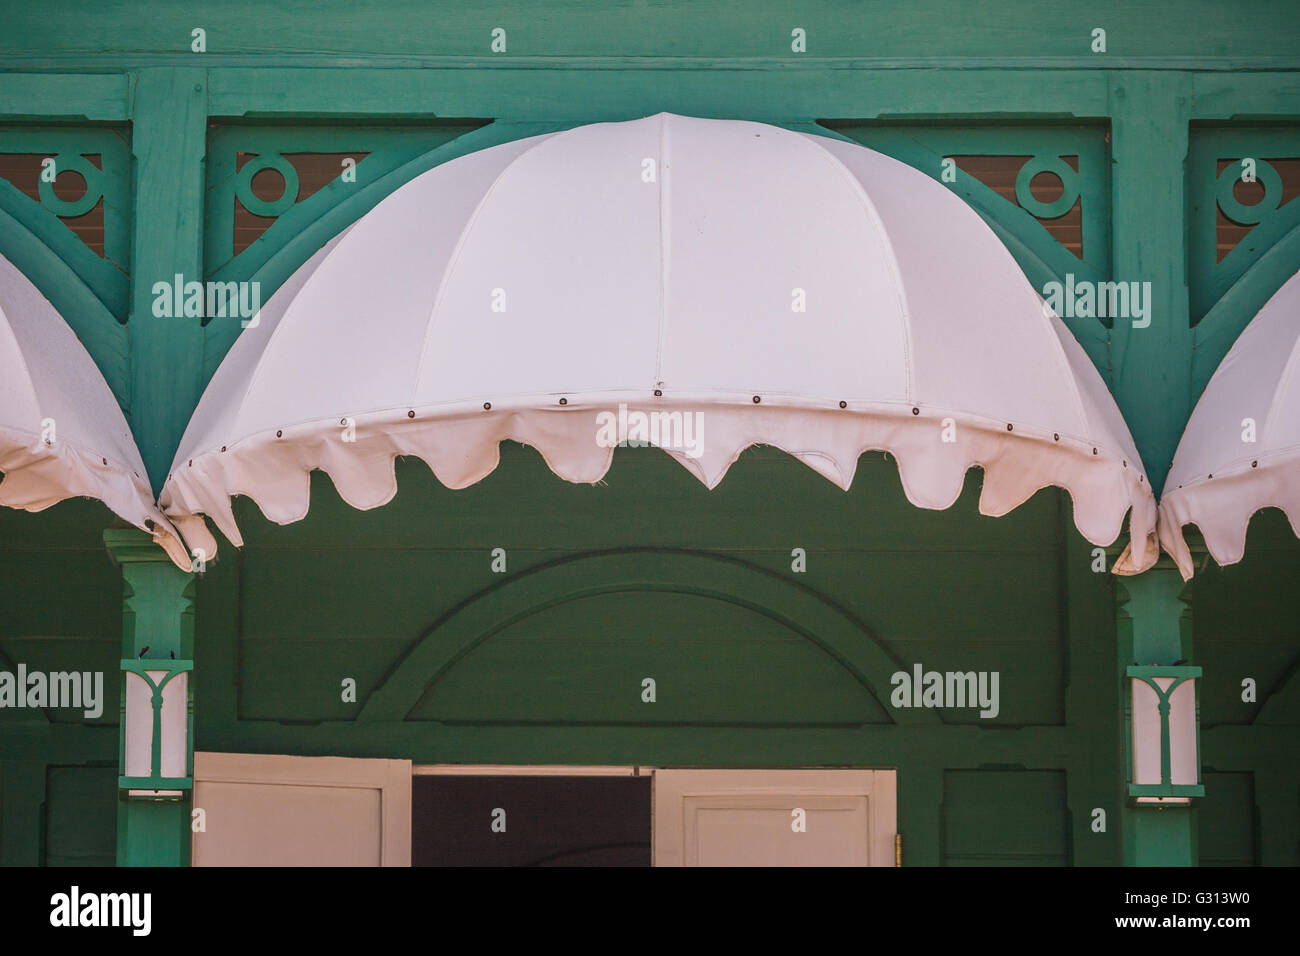 Vintage outdoor: 89 Pratic dome awnings stop time at Kempinski Palace